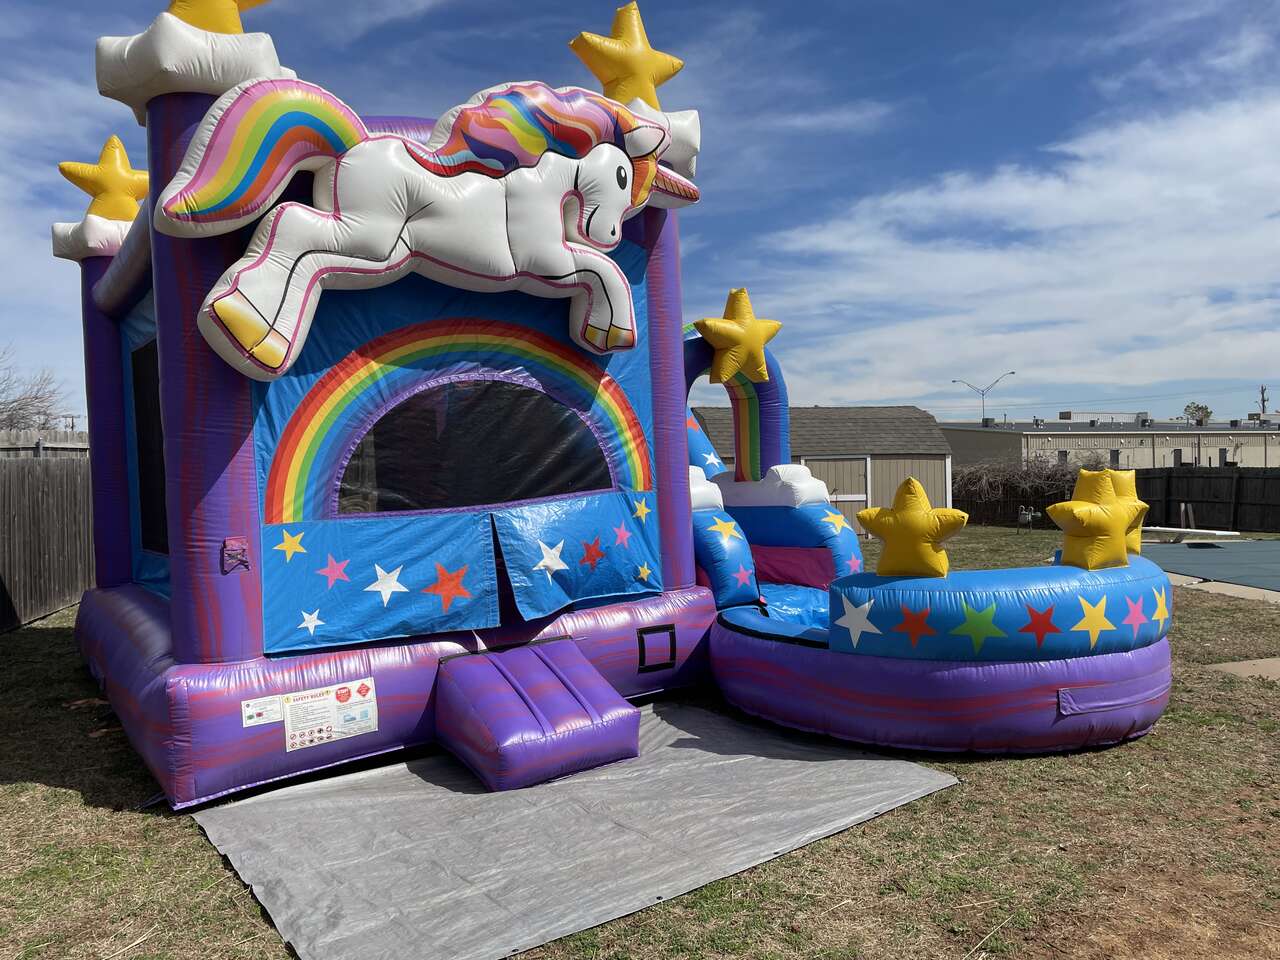 Exciting Options for a Bounce House in Edmond Oklahoma